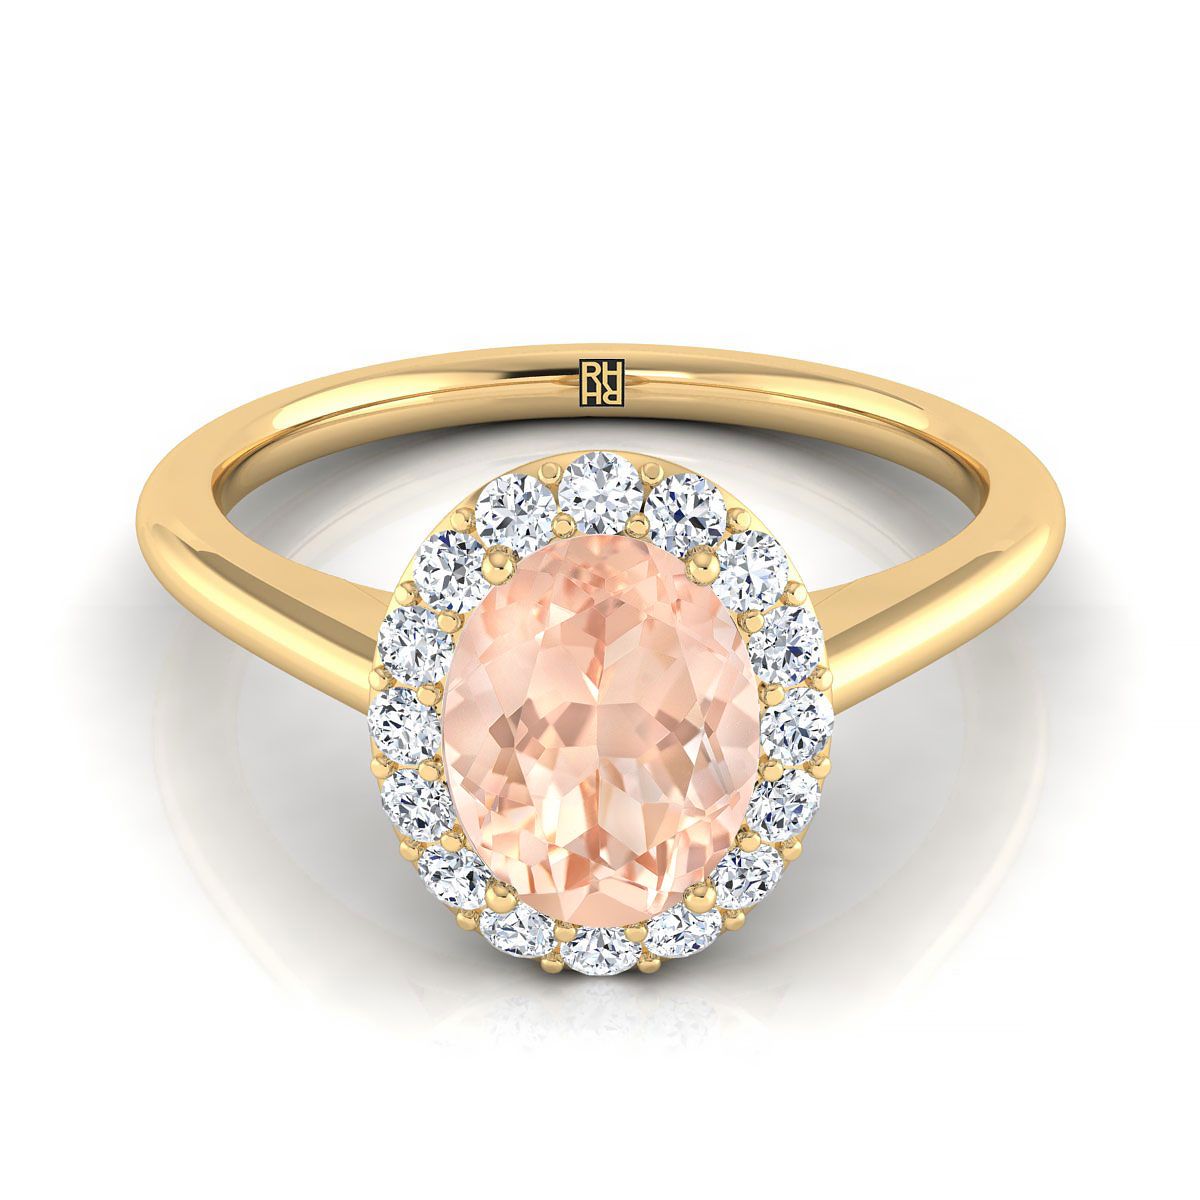 14K Yellow Gold Oval Morganite Shared Prong Diamond Halo Engagement Ring -1/5ctw